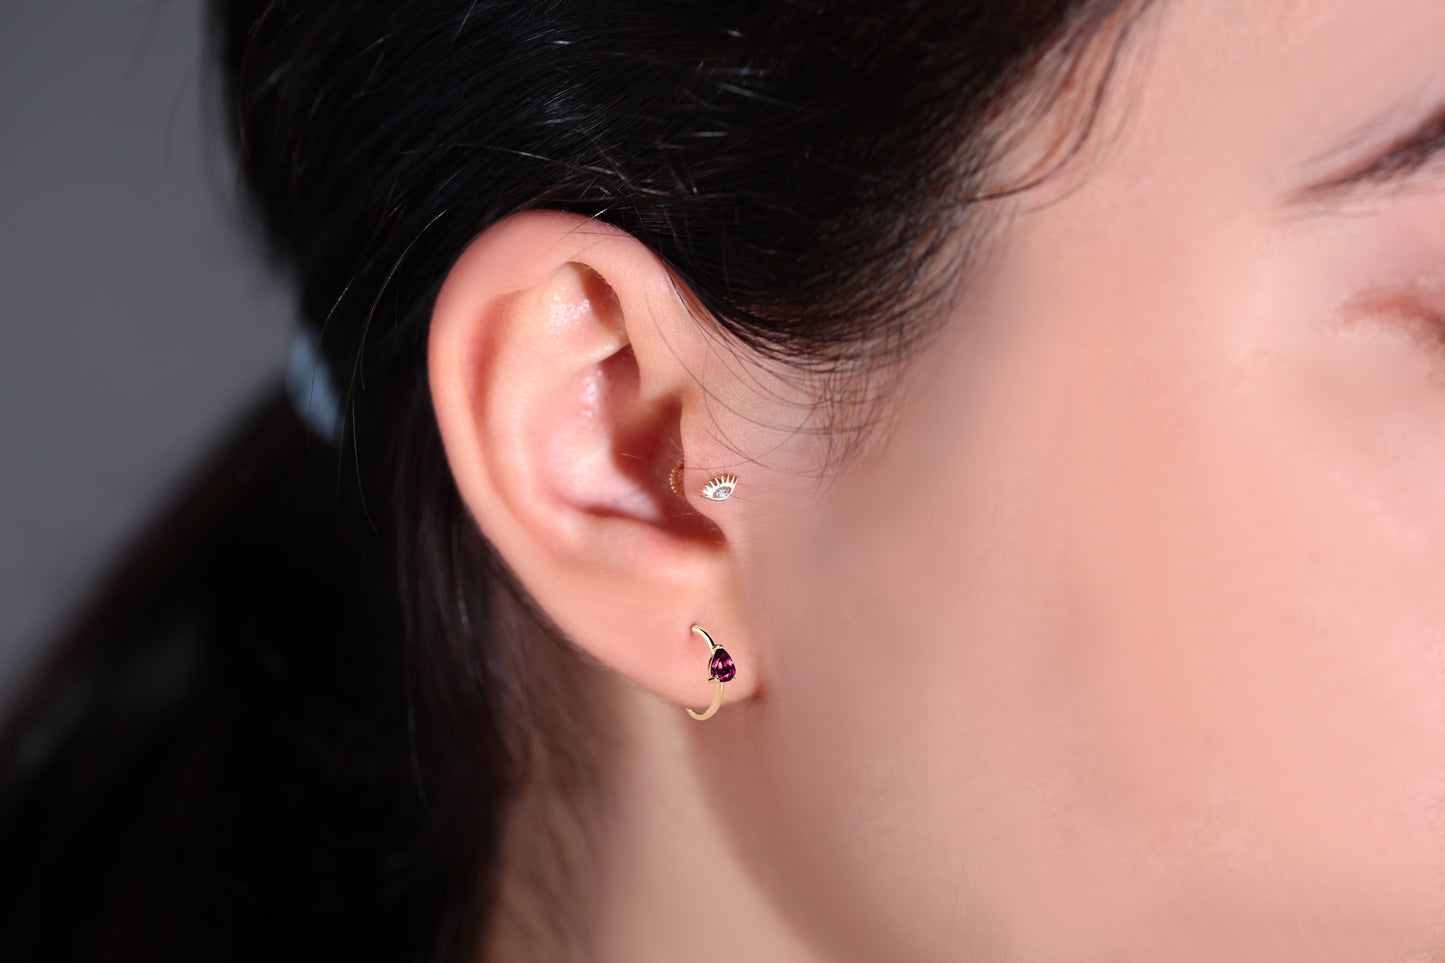 Cartilage Hoop with Pear Cut Ruby Earring in 14K Yellow White Rose Solid Gold Lobe Earring 16G(1.2mm)